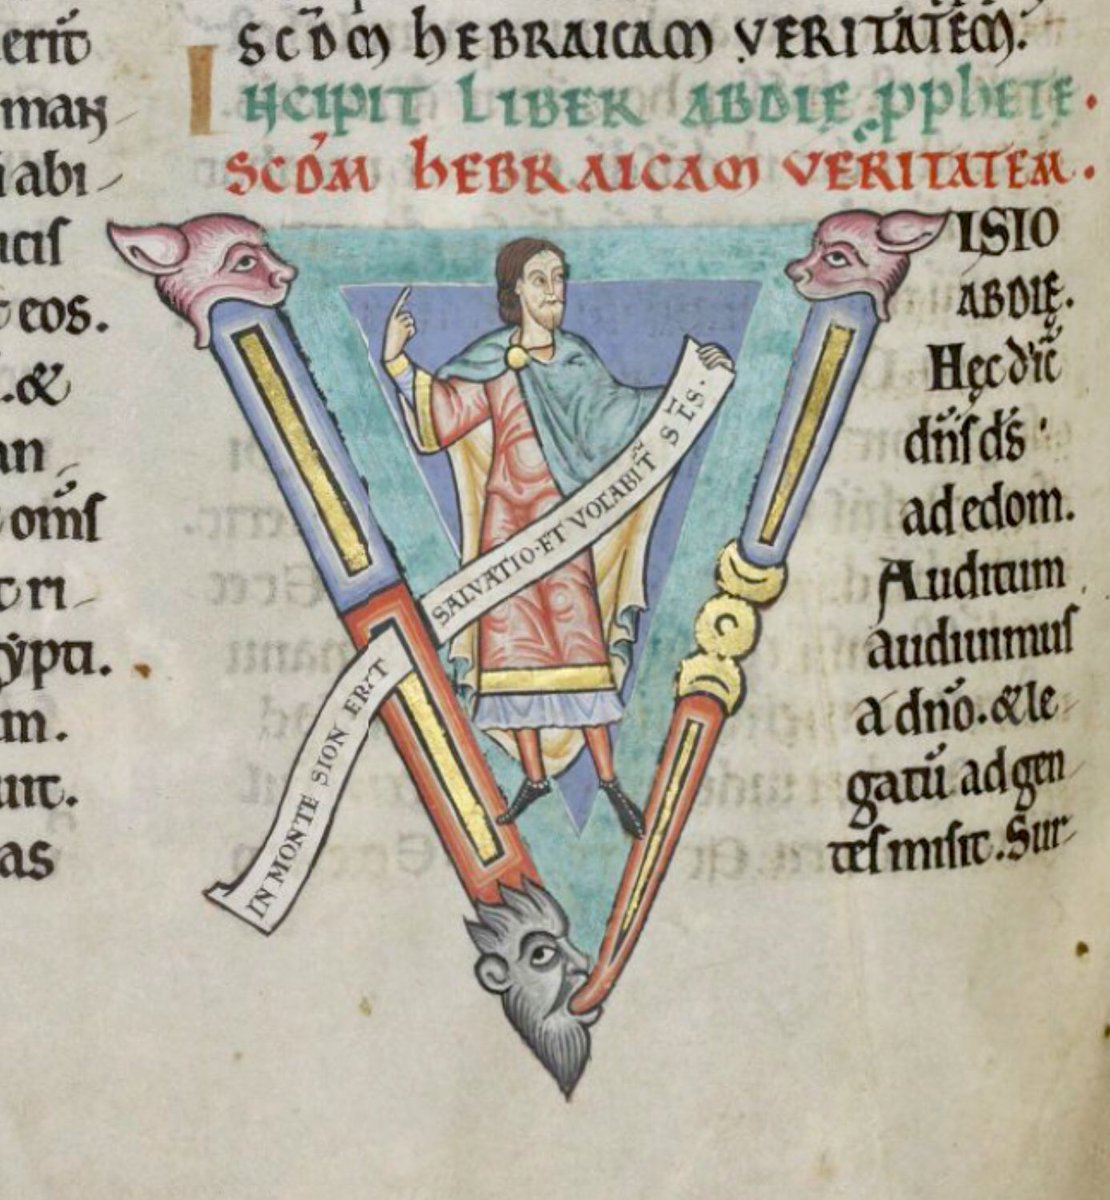 Initial 'V'(isio) at the beginning of Obadiah with Obadiah holding a scroll on which is written: 'In monte Sion erit salvatio et vocabitur sanctus'. #MS003TheDoverBibleCambridge, Corpus Christi College, MS 003; The Dover Bible, Volume I; 12th century; f.261v  @ParkerLibCCCC